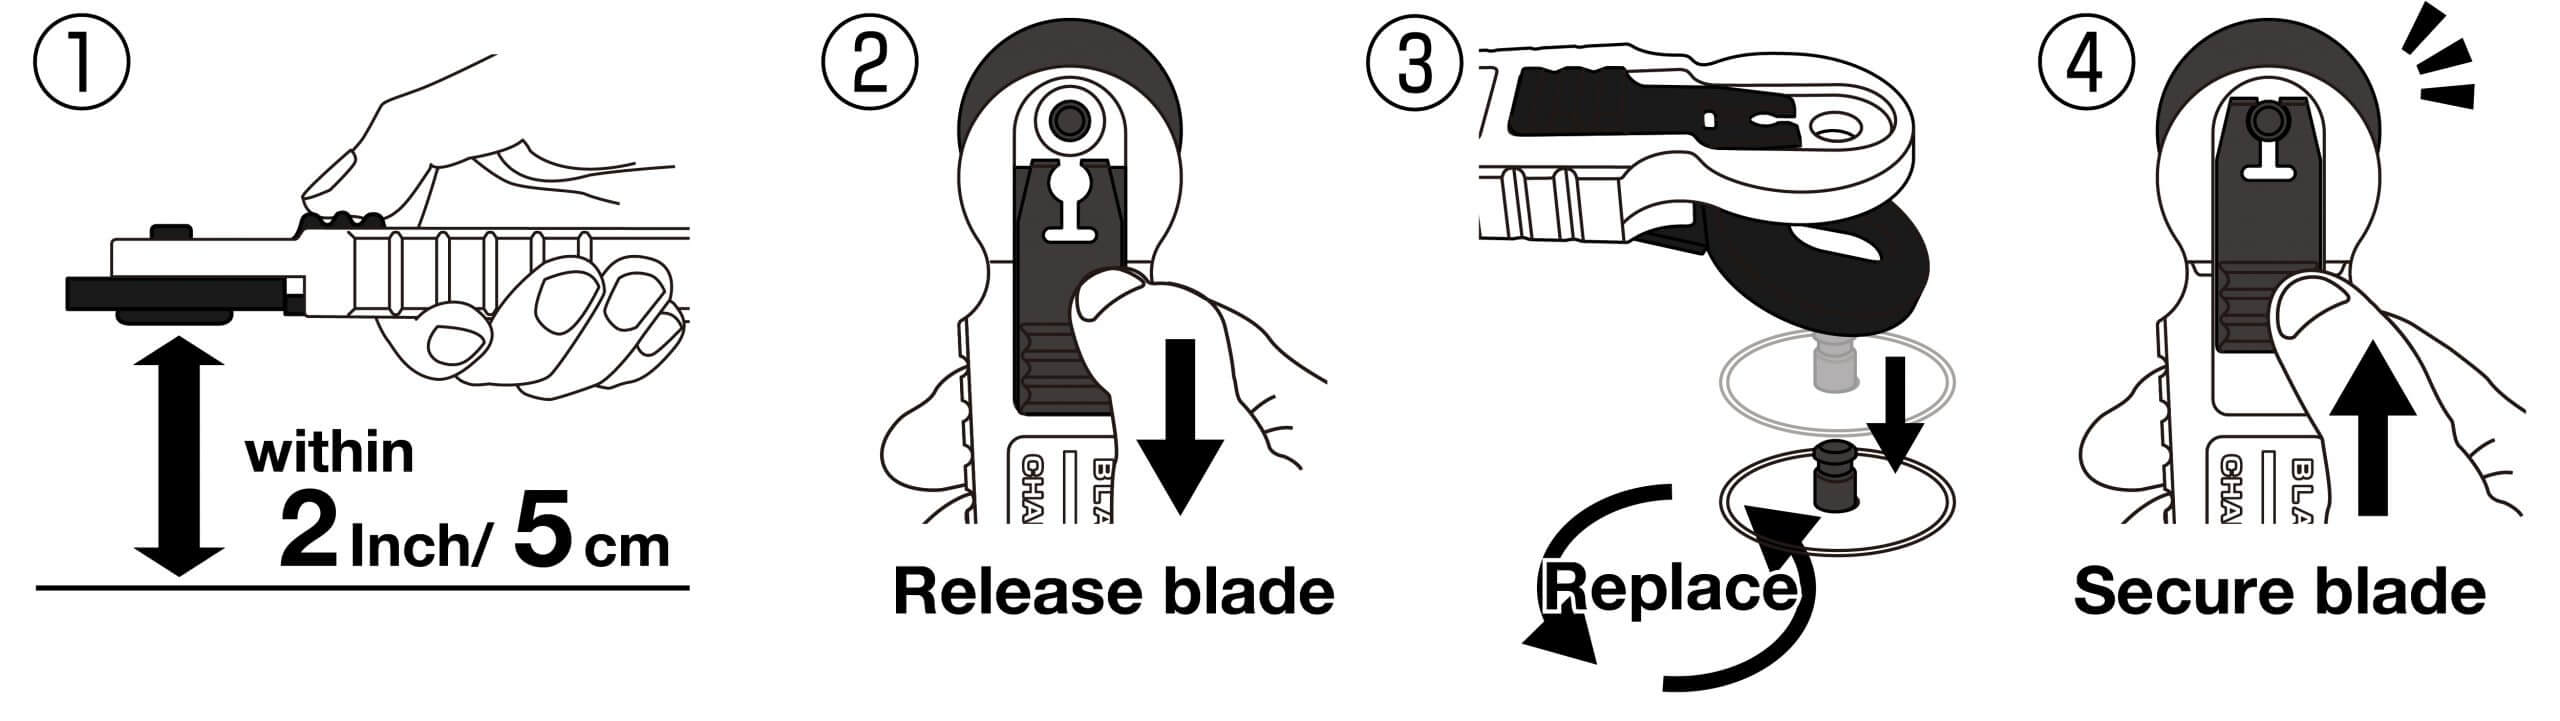 How to change blade